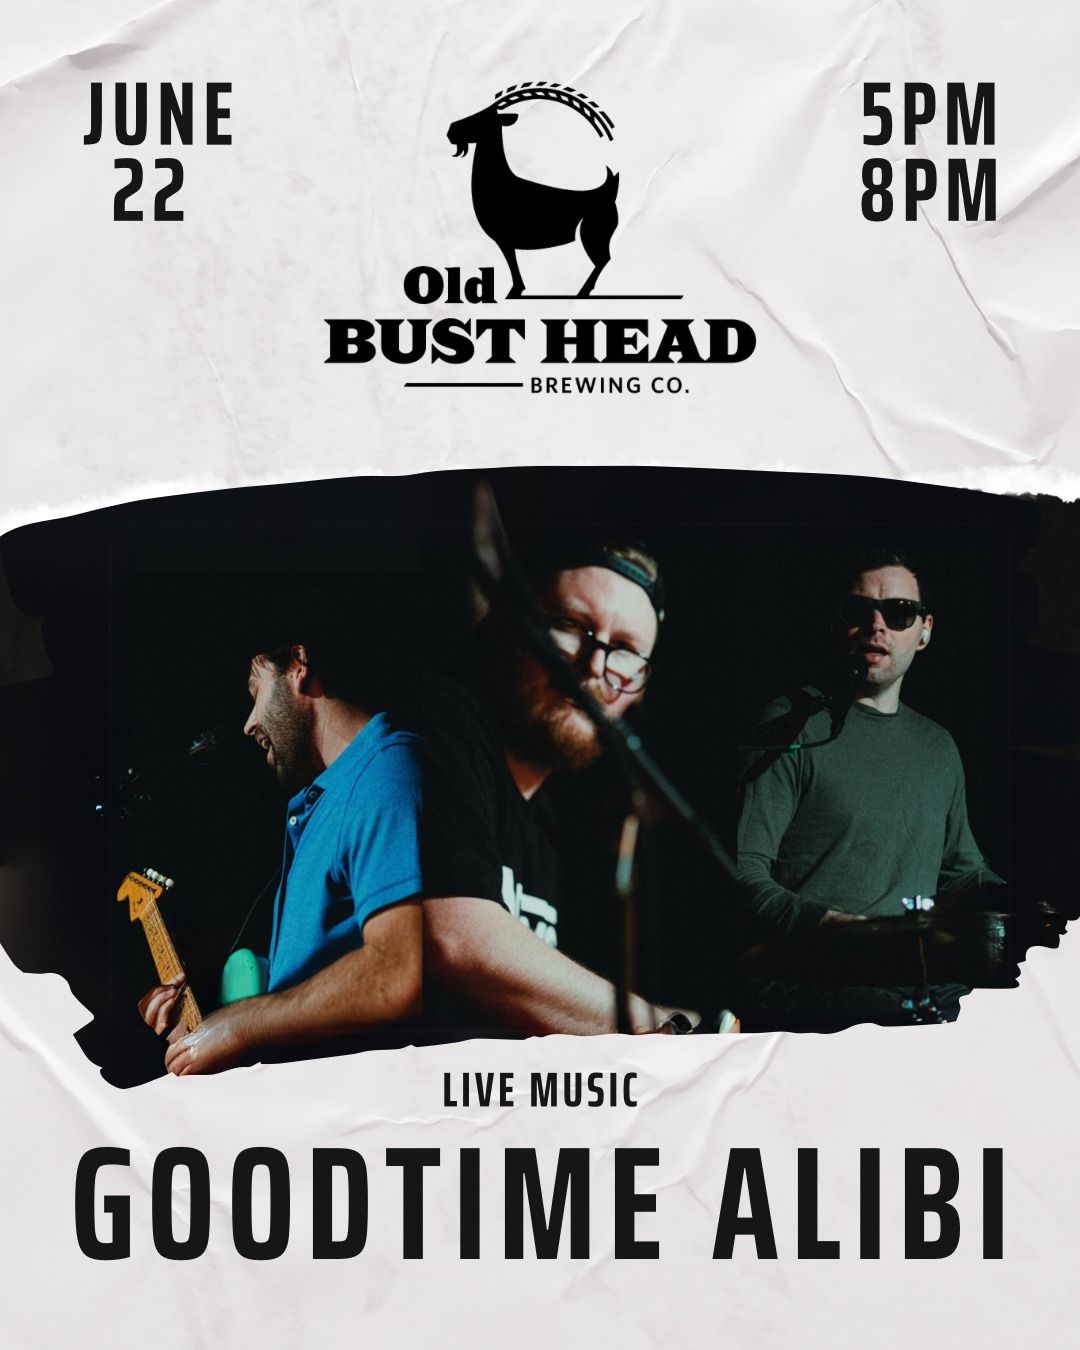 Goodtime Alibi LIVE at Old Bust Head Brewing Co.